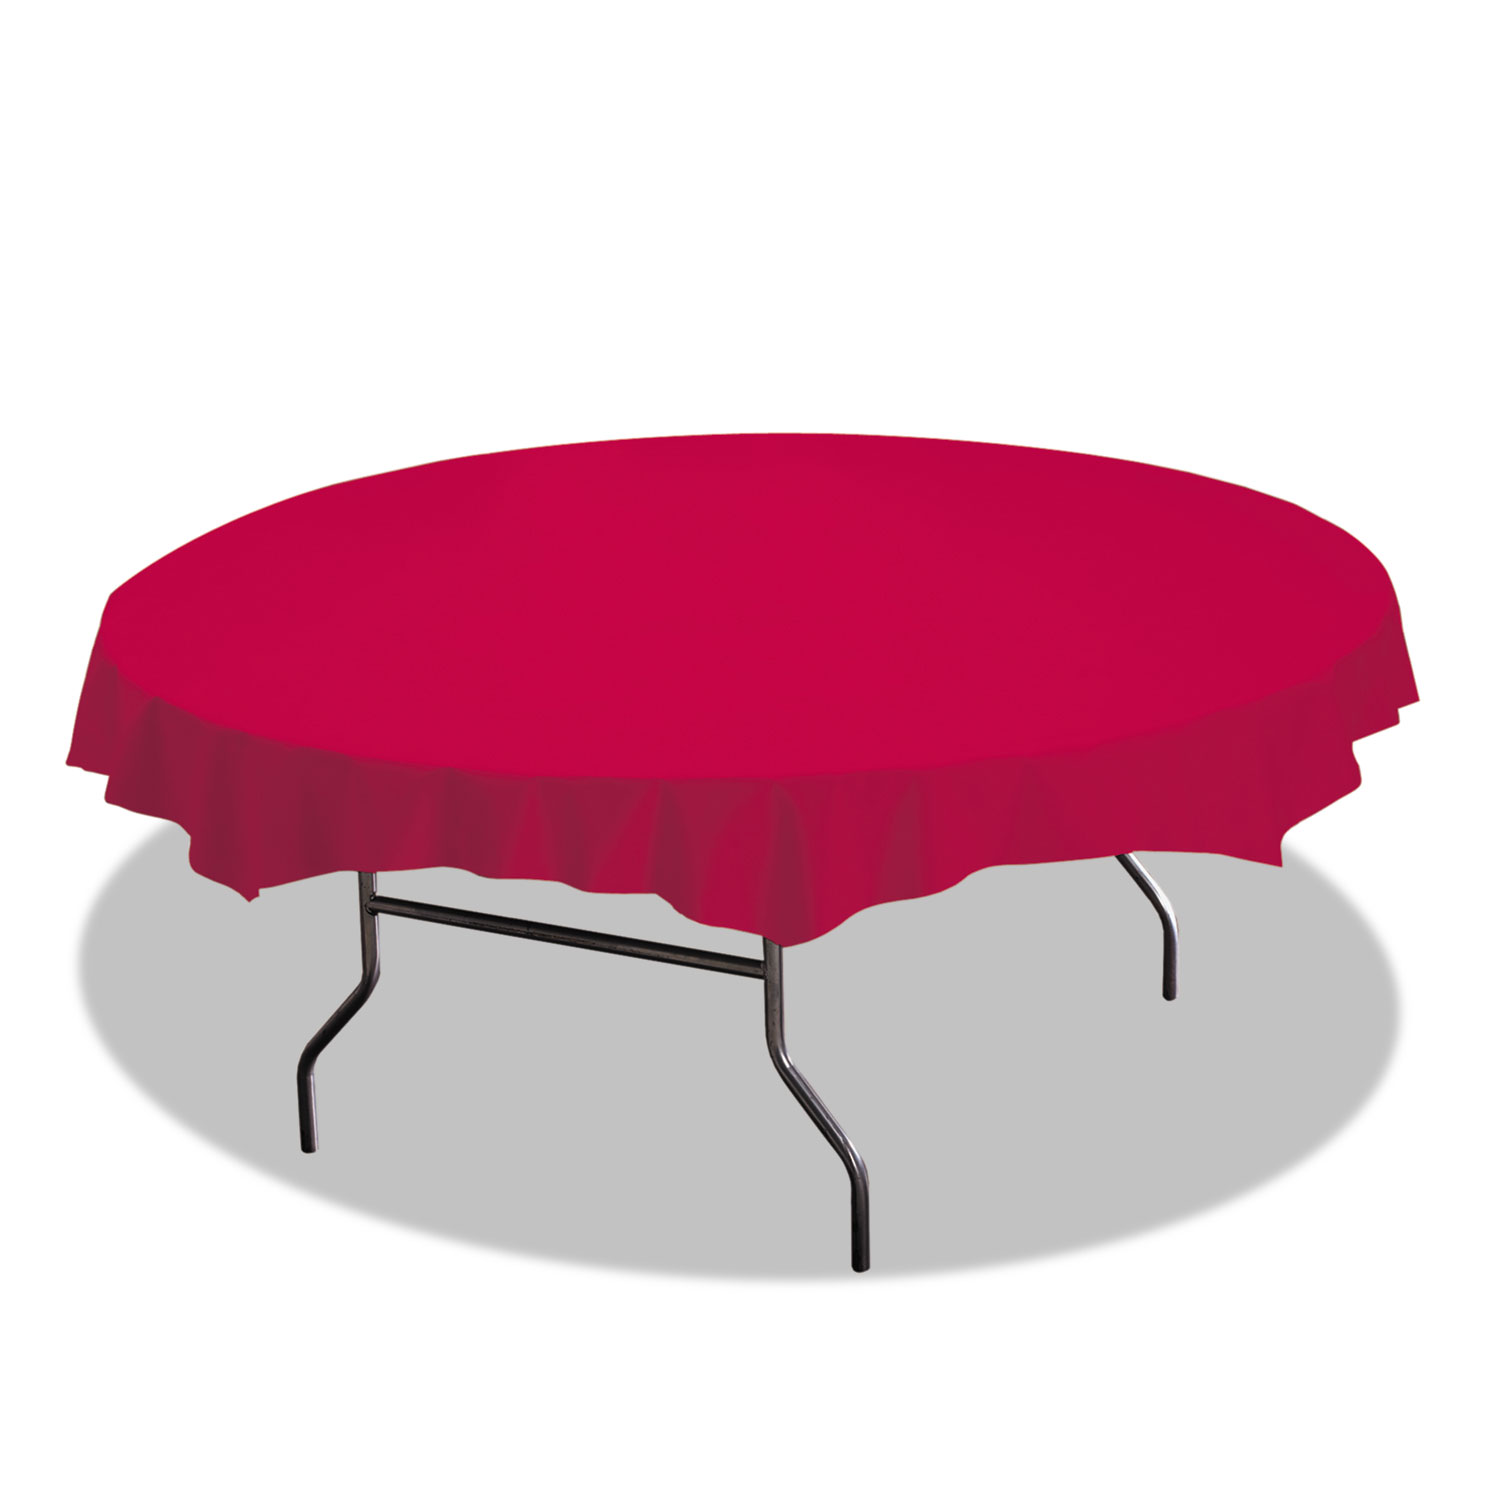 Octy-Round Plastic Tablecover, 82 Diameter, Red, 12/Carton